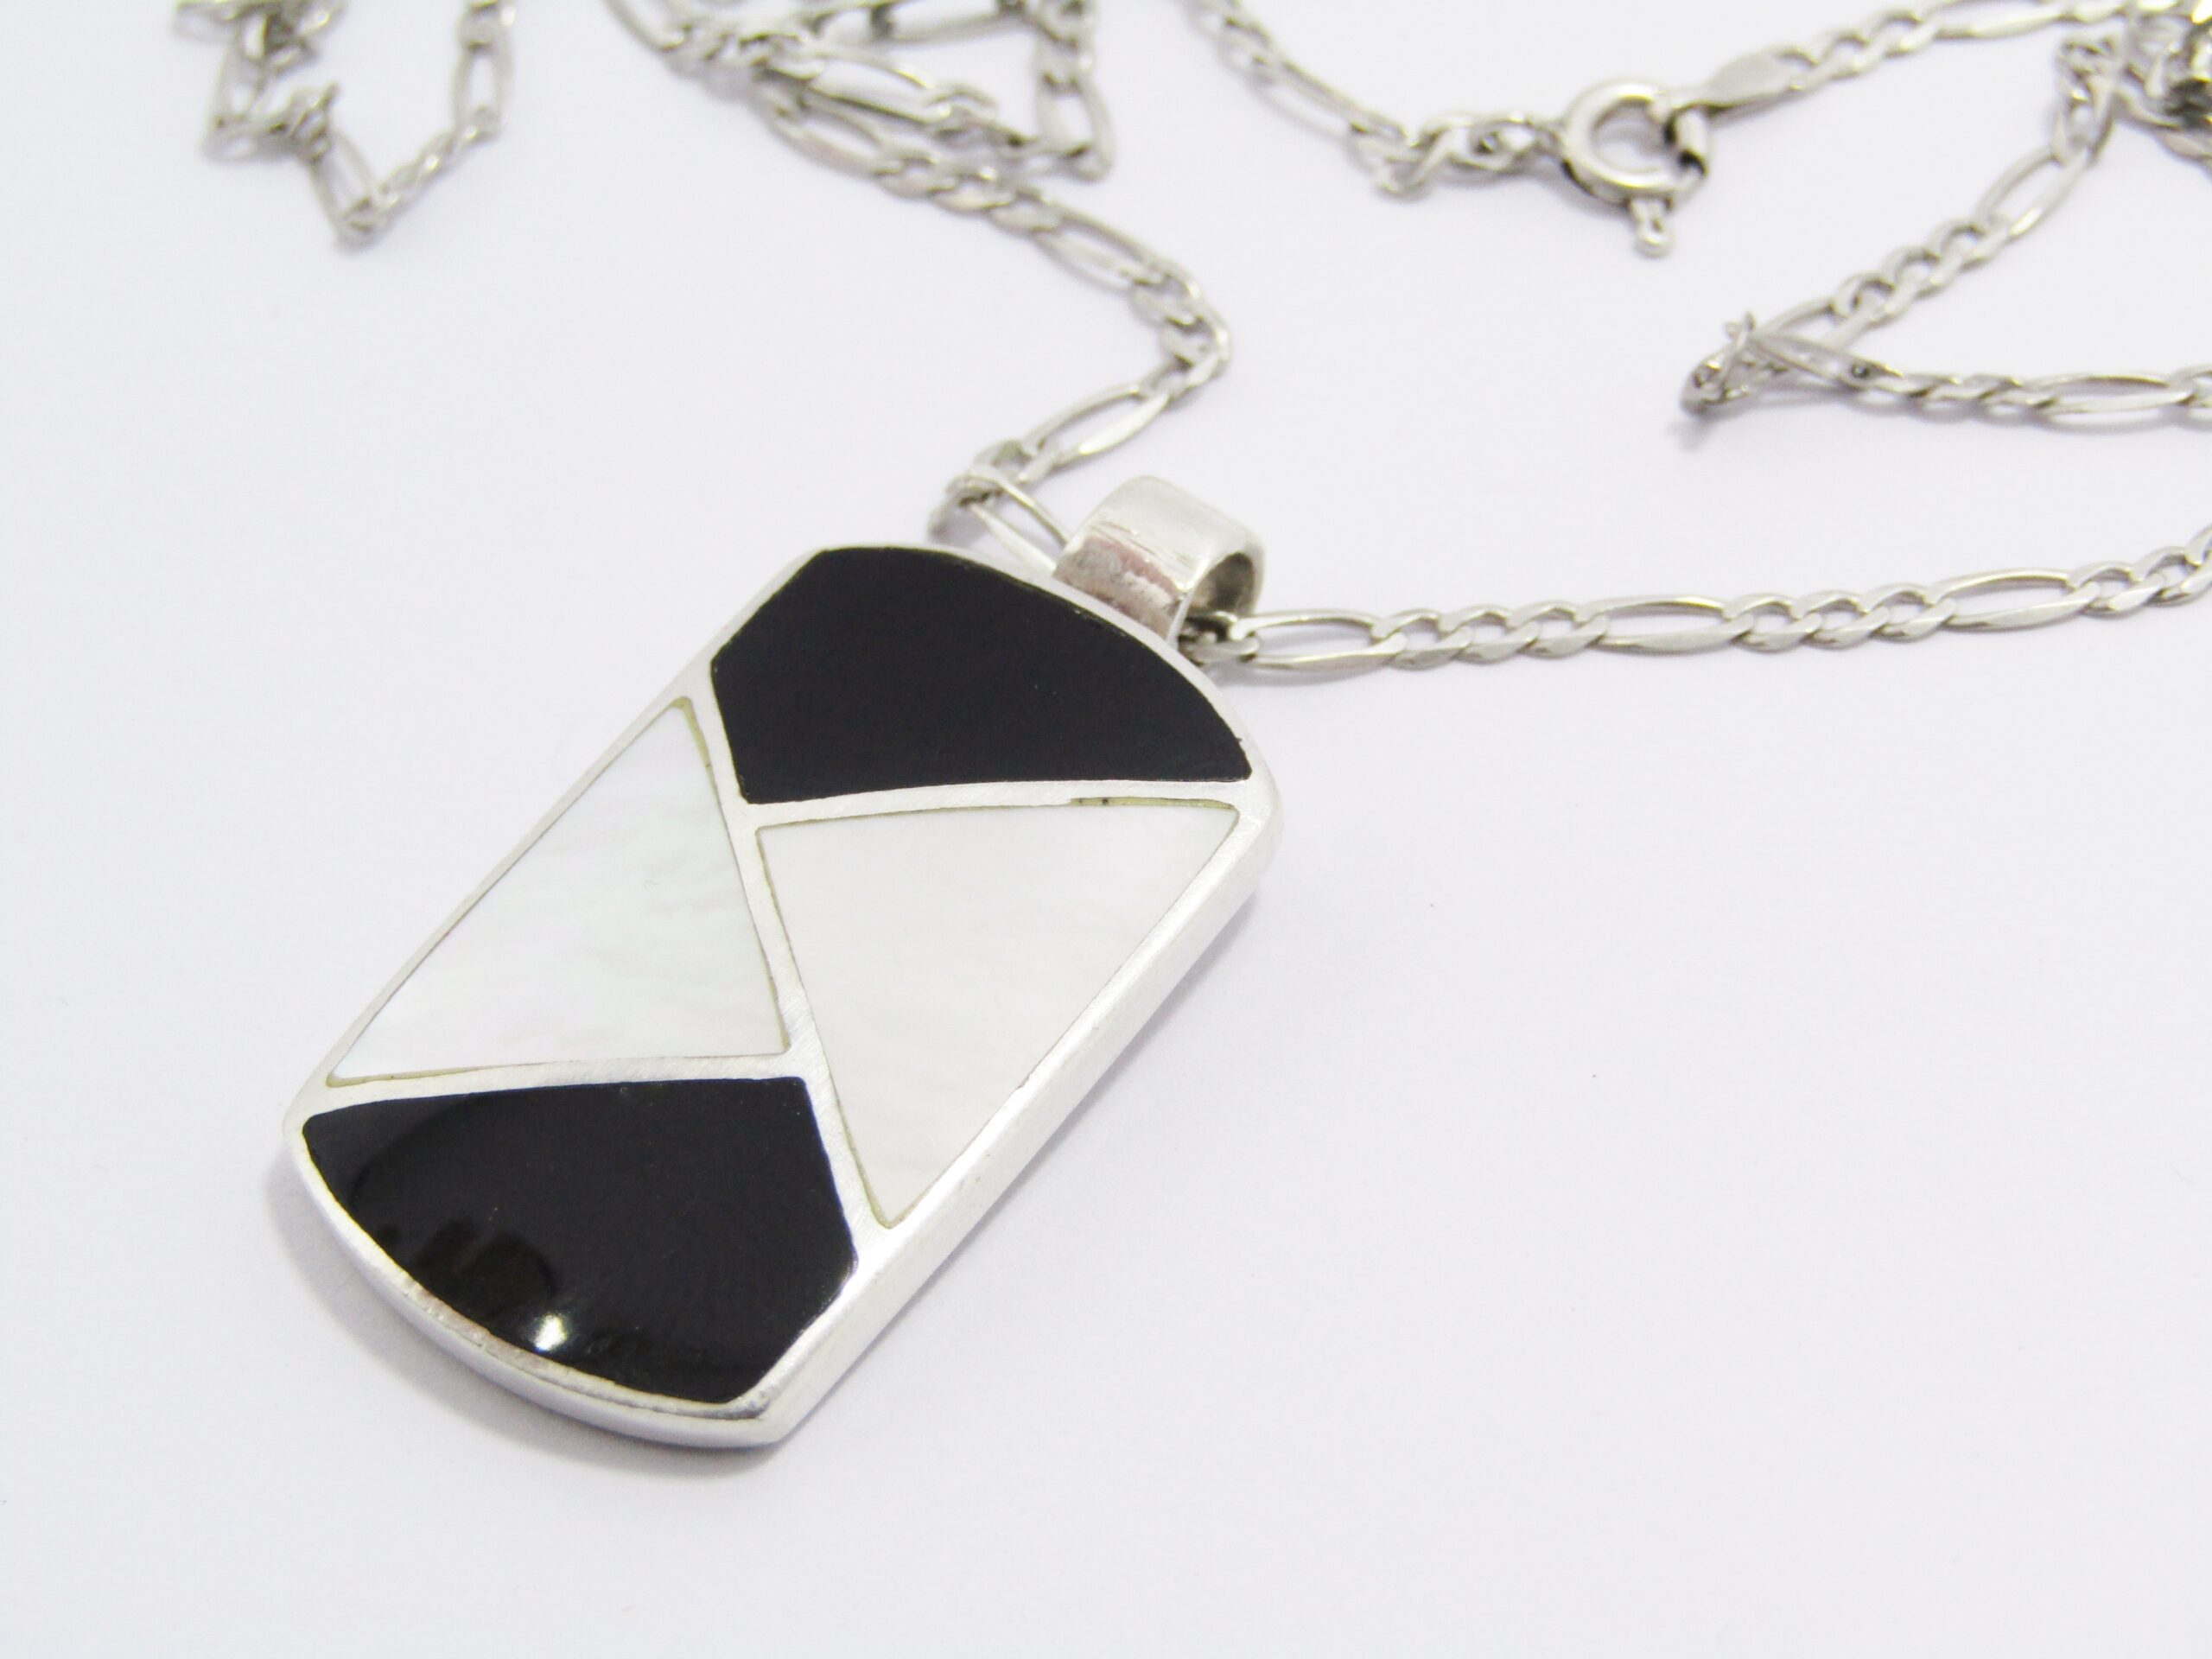 A Lovely Mother of Pearl and Black inlay Necklace on Chain in Sterling Silver